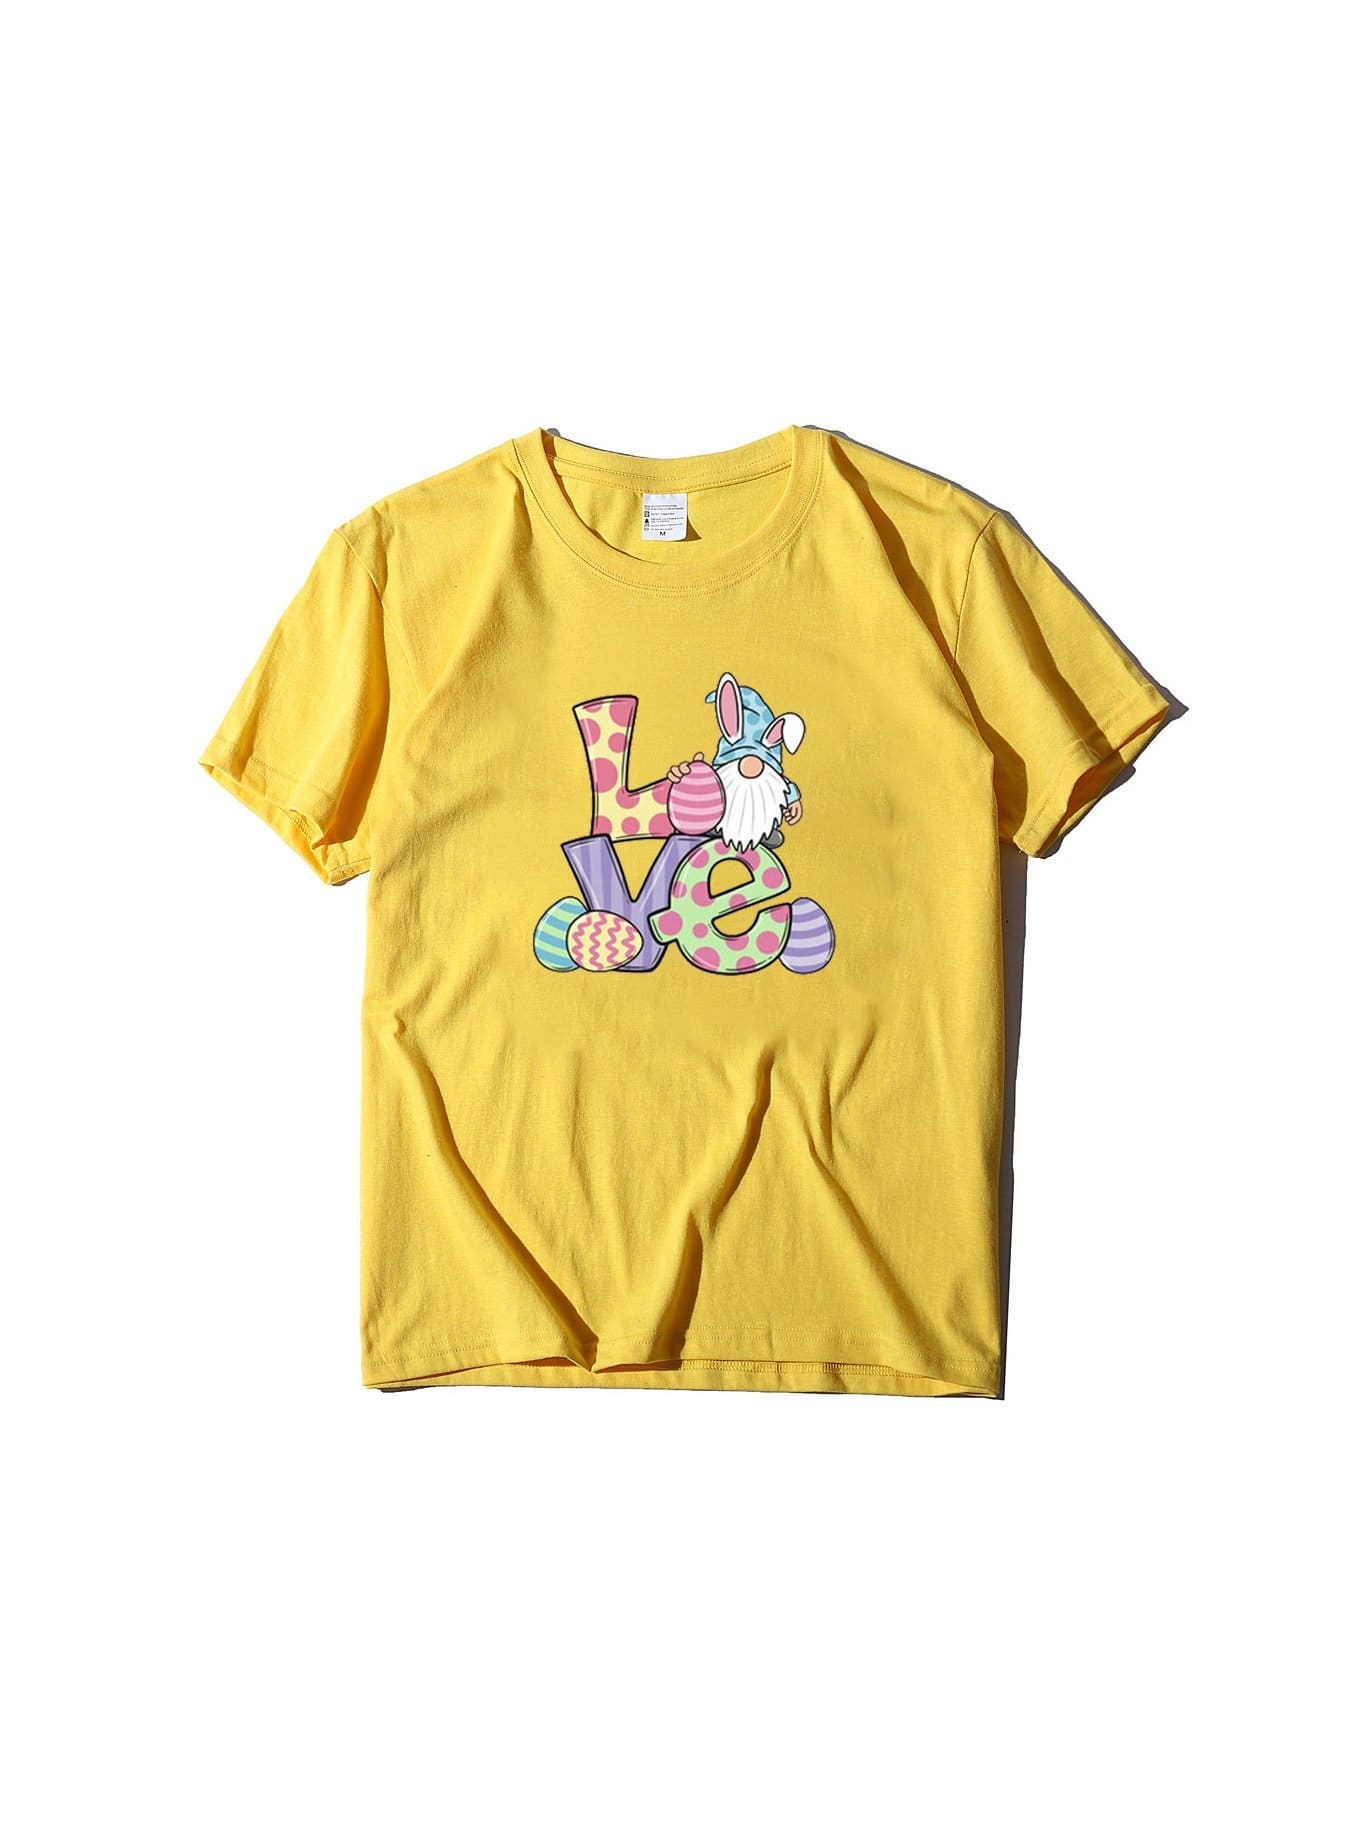 lovevop Letter Printed Casual Women T-Shirt For Summer